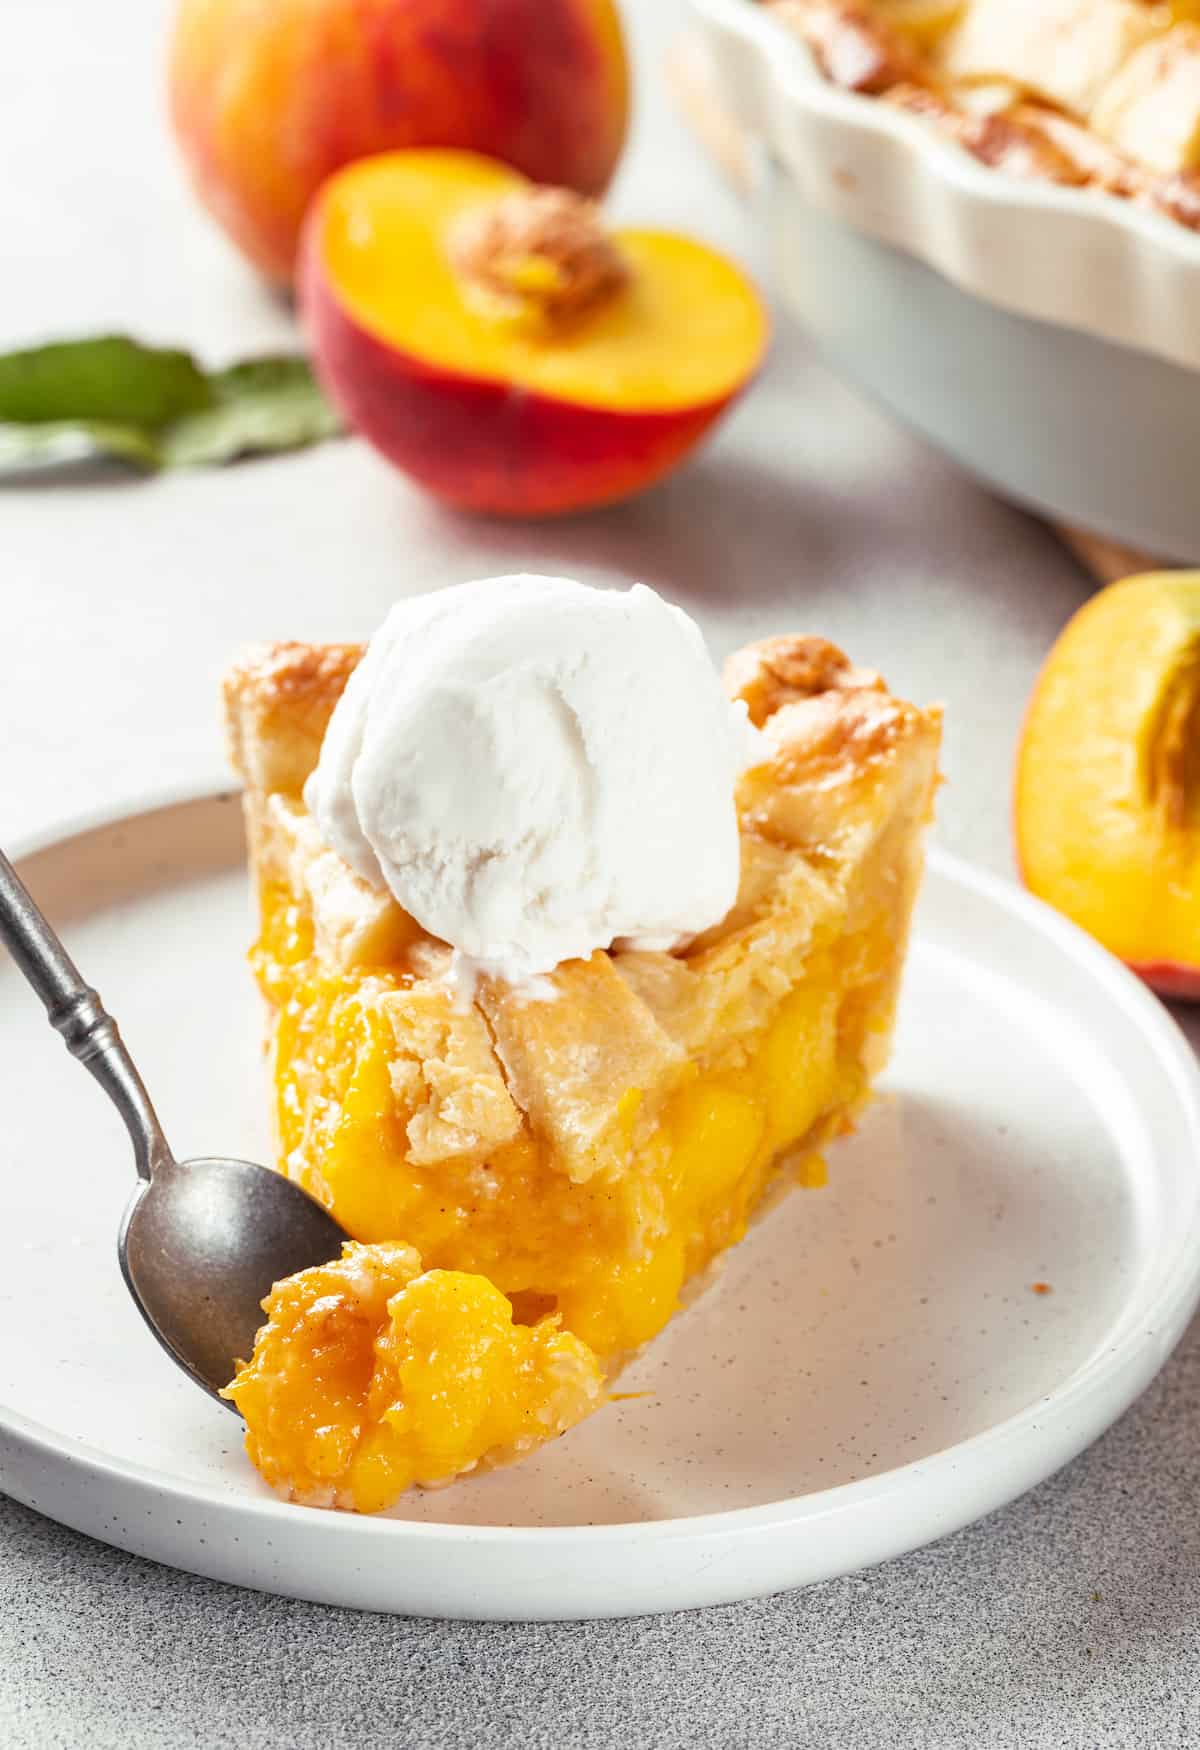 A slice of peach pie topped with a scoop of ice cream